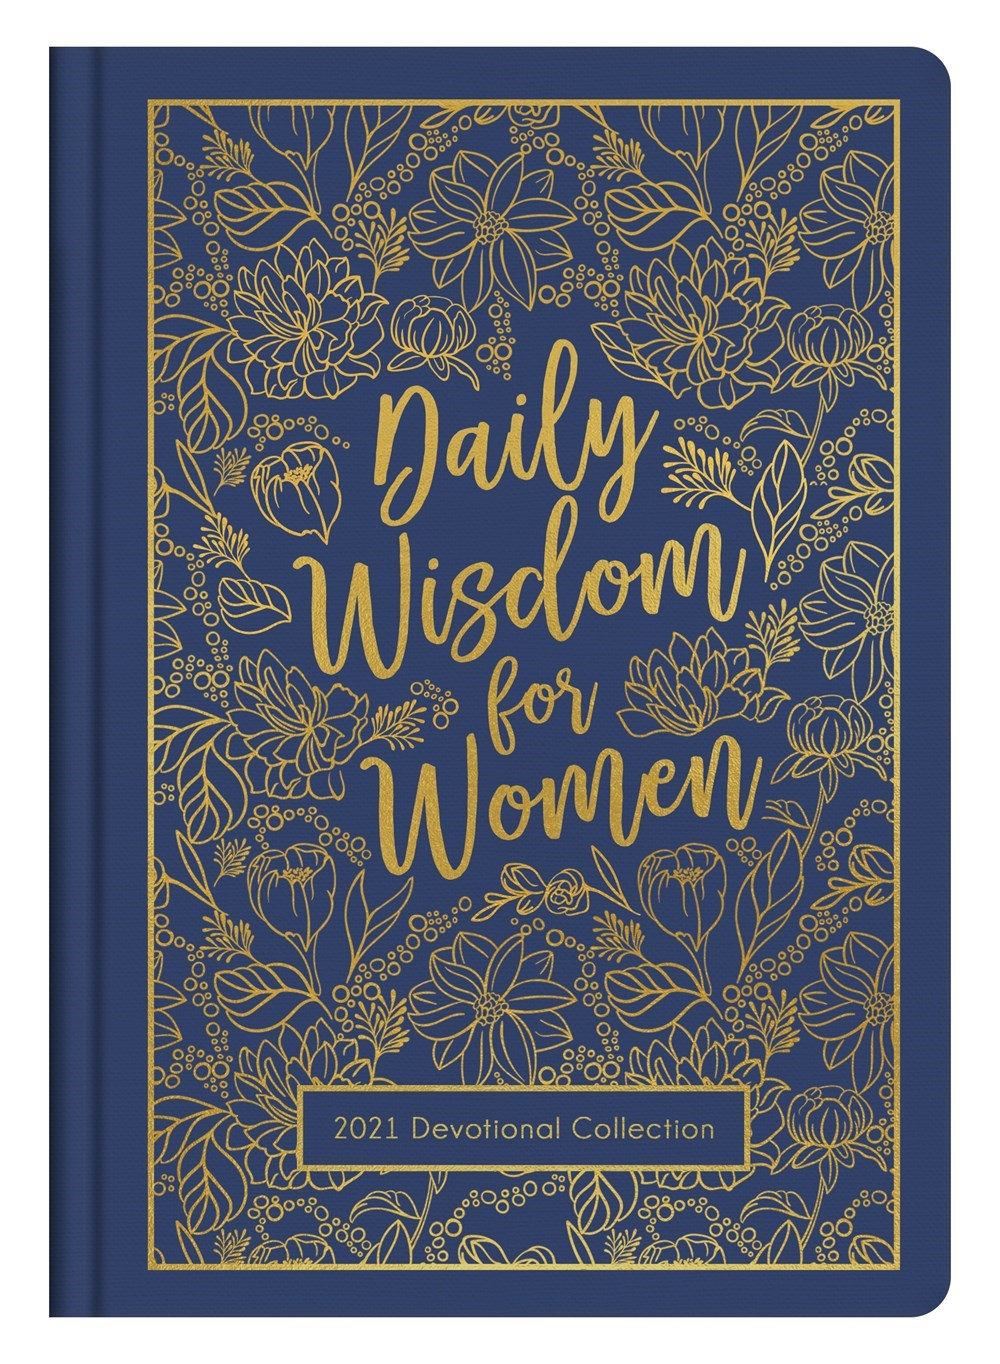 Image of Daily Wisdom for Women 2021 Devotional Collection other